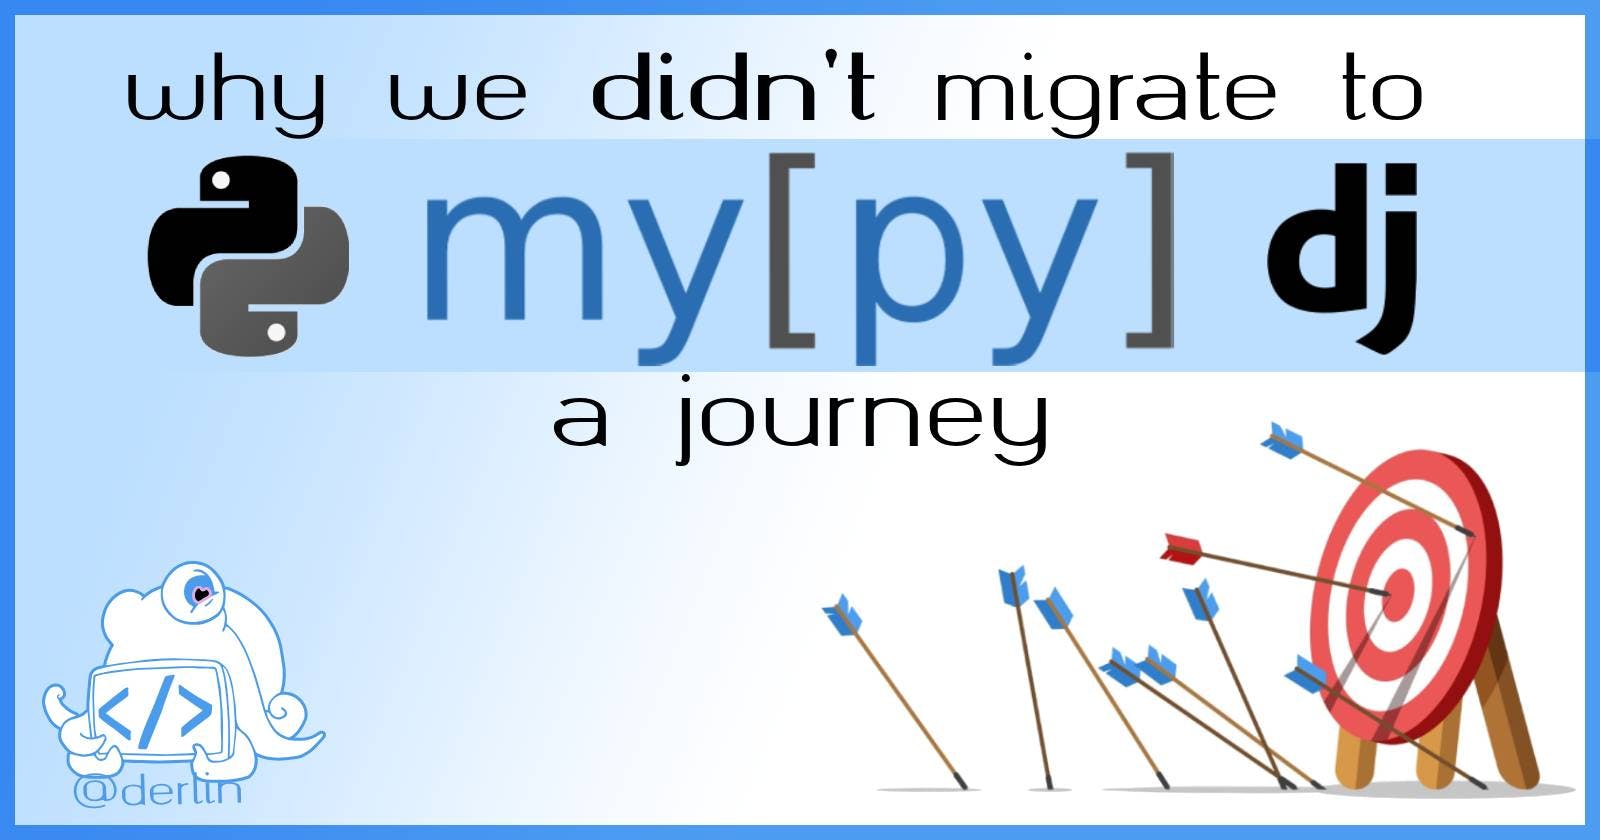 When plans go astray: my unsuccessful journey of migrating a large Django project to Mypy